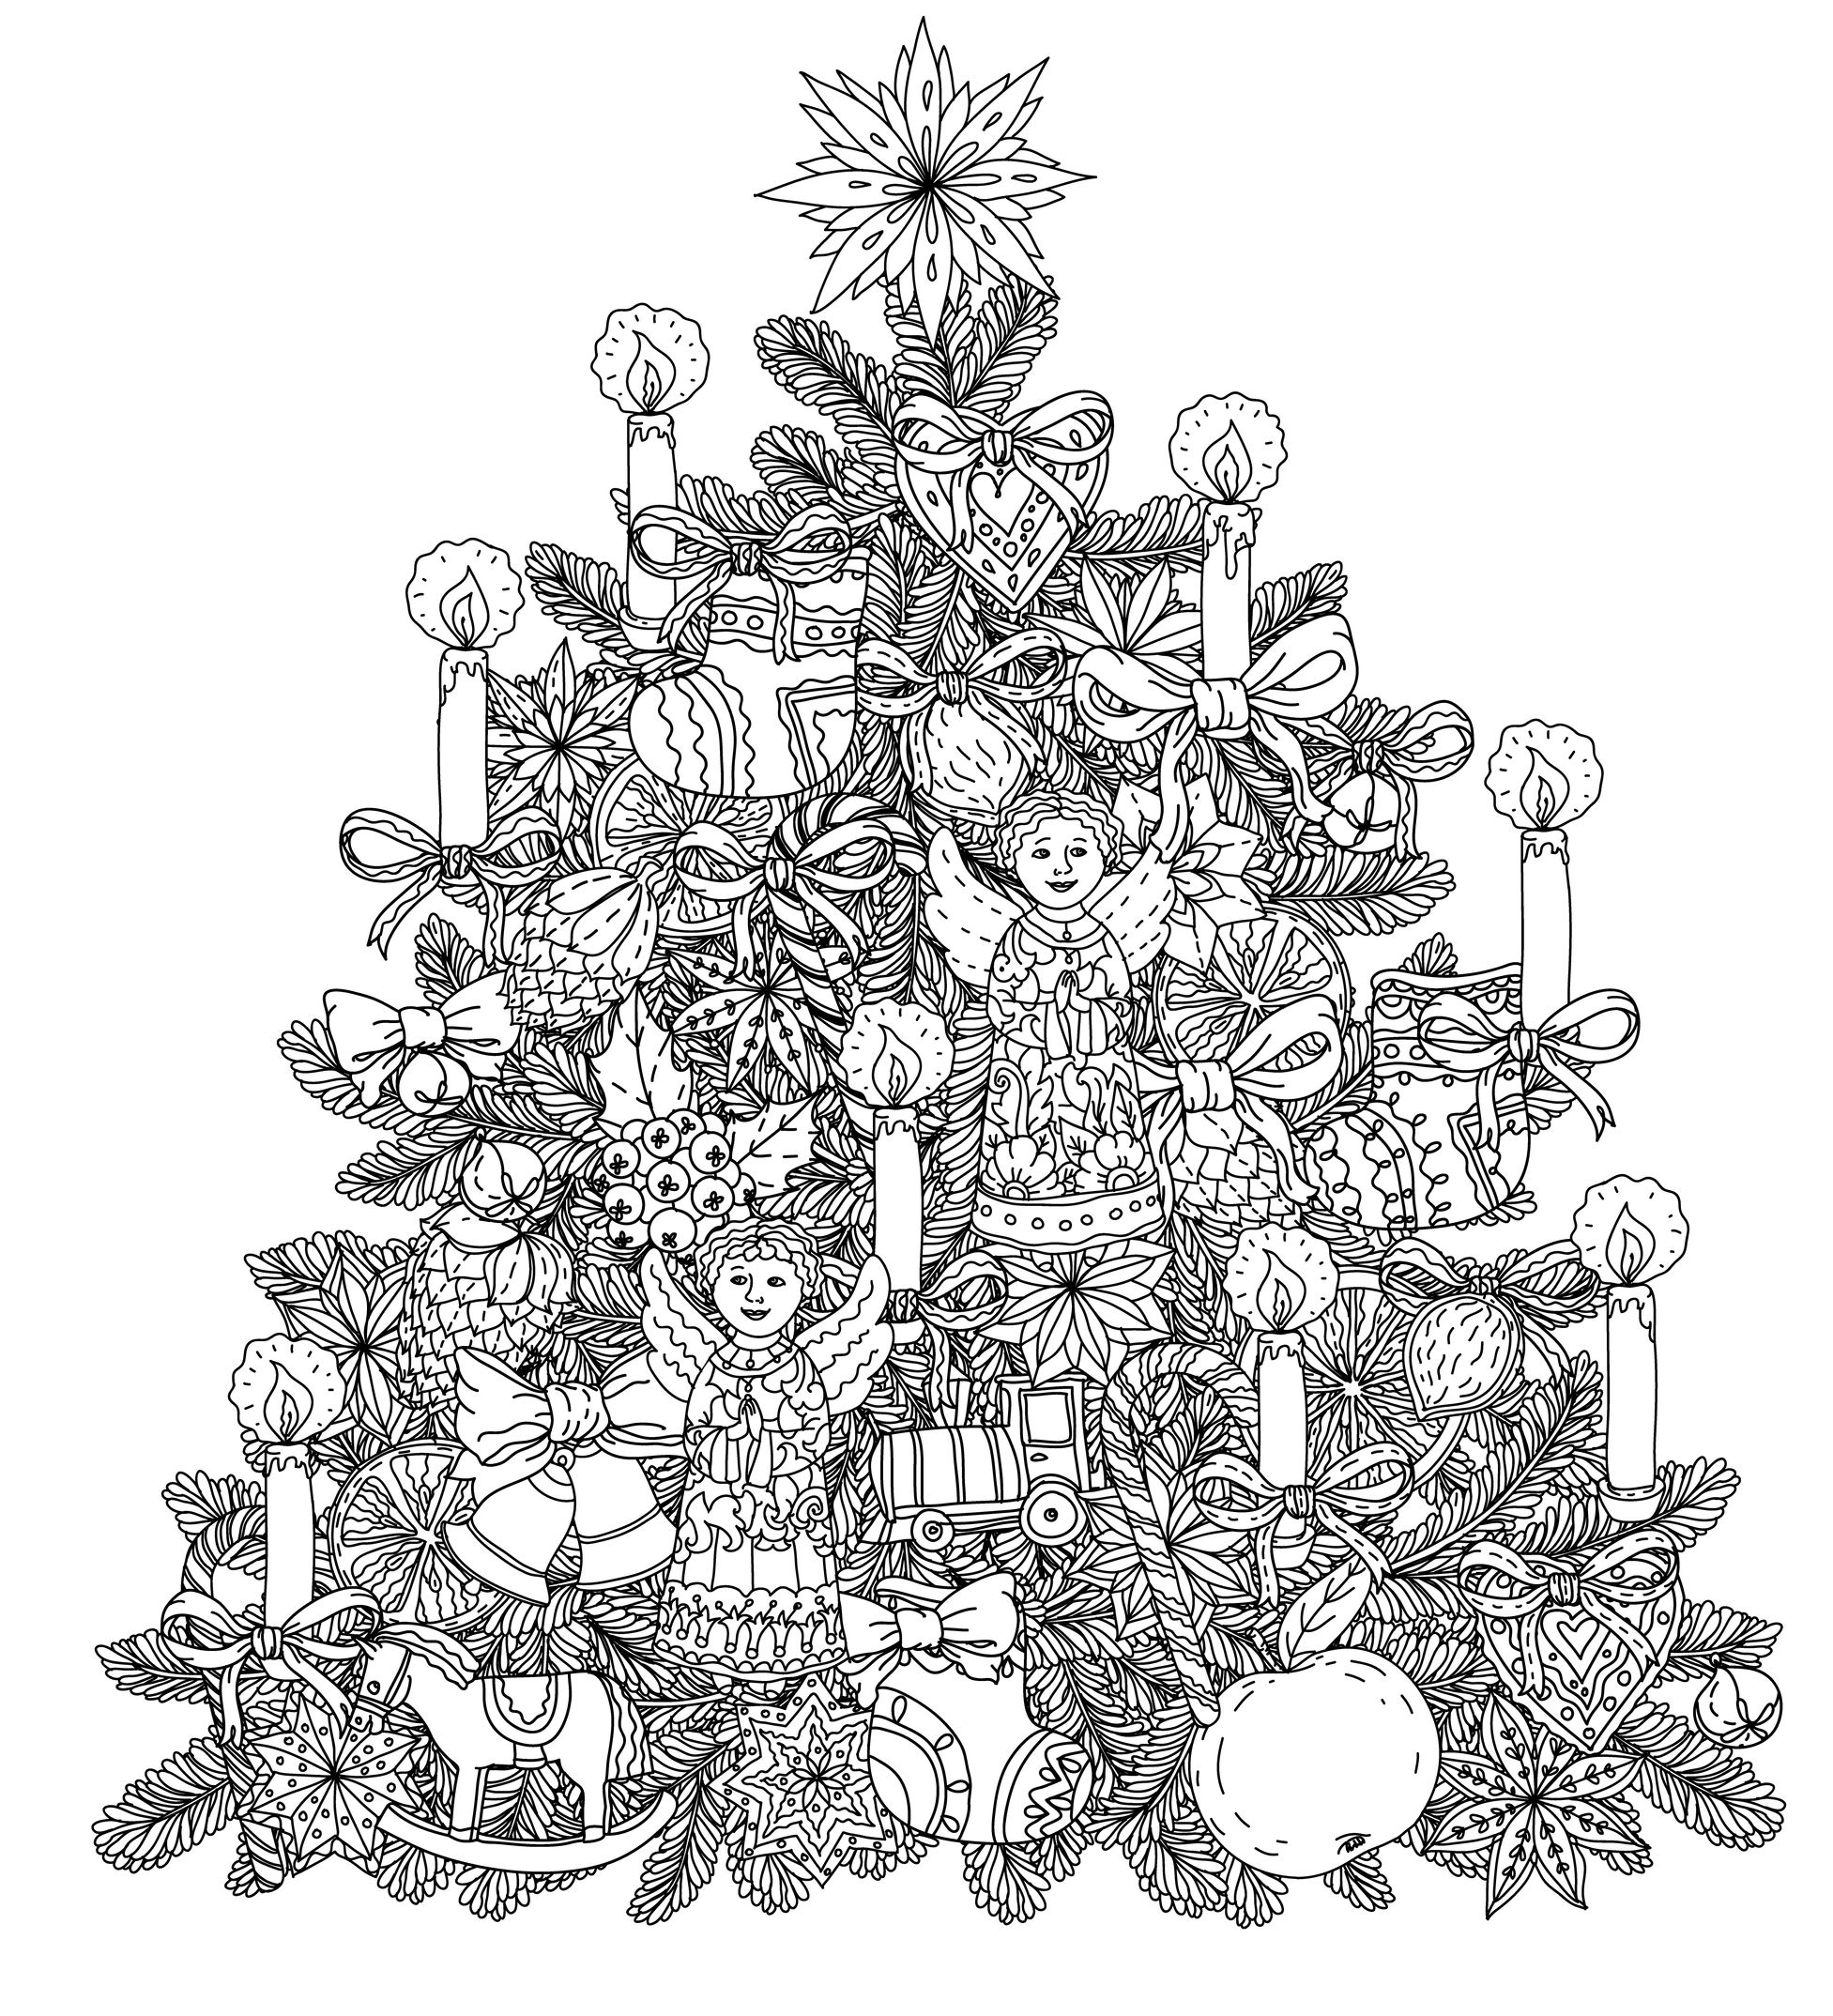 Christmas Tree With Ornaments - Christmas Adult Coloring Pages - Free Printable Christmas Tree Ornaments To Color